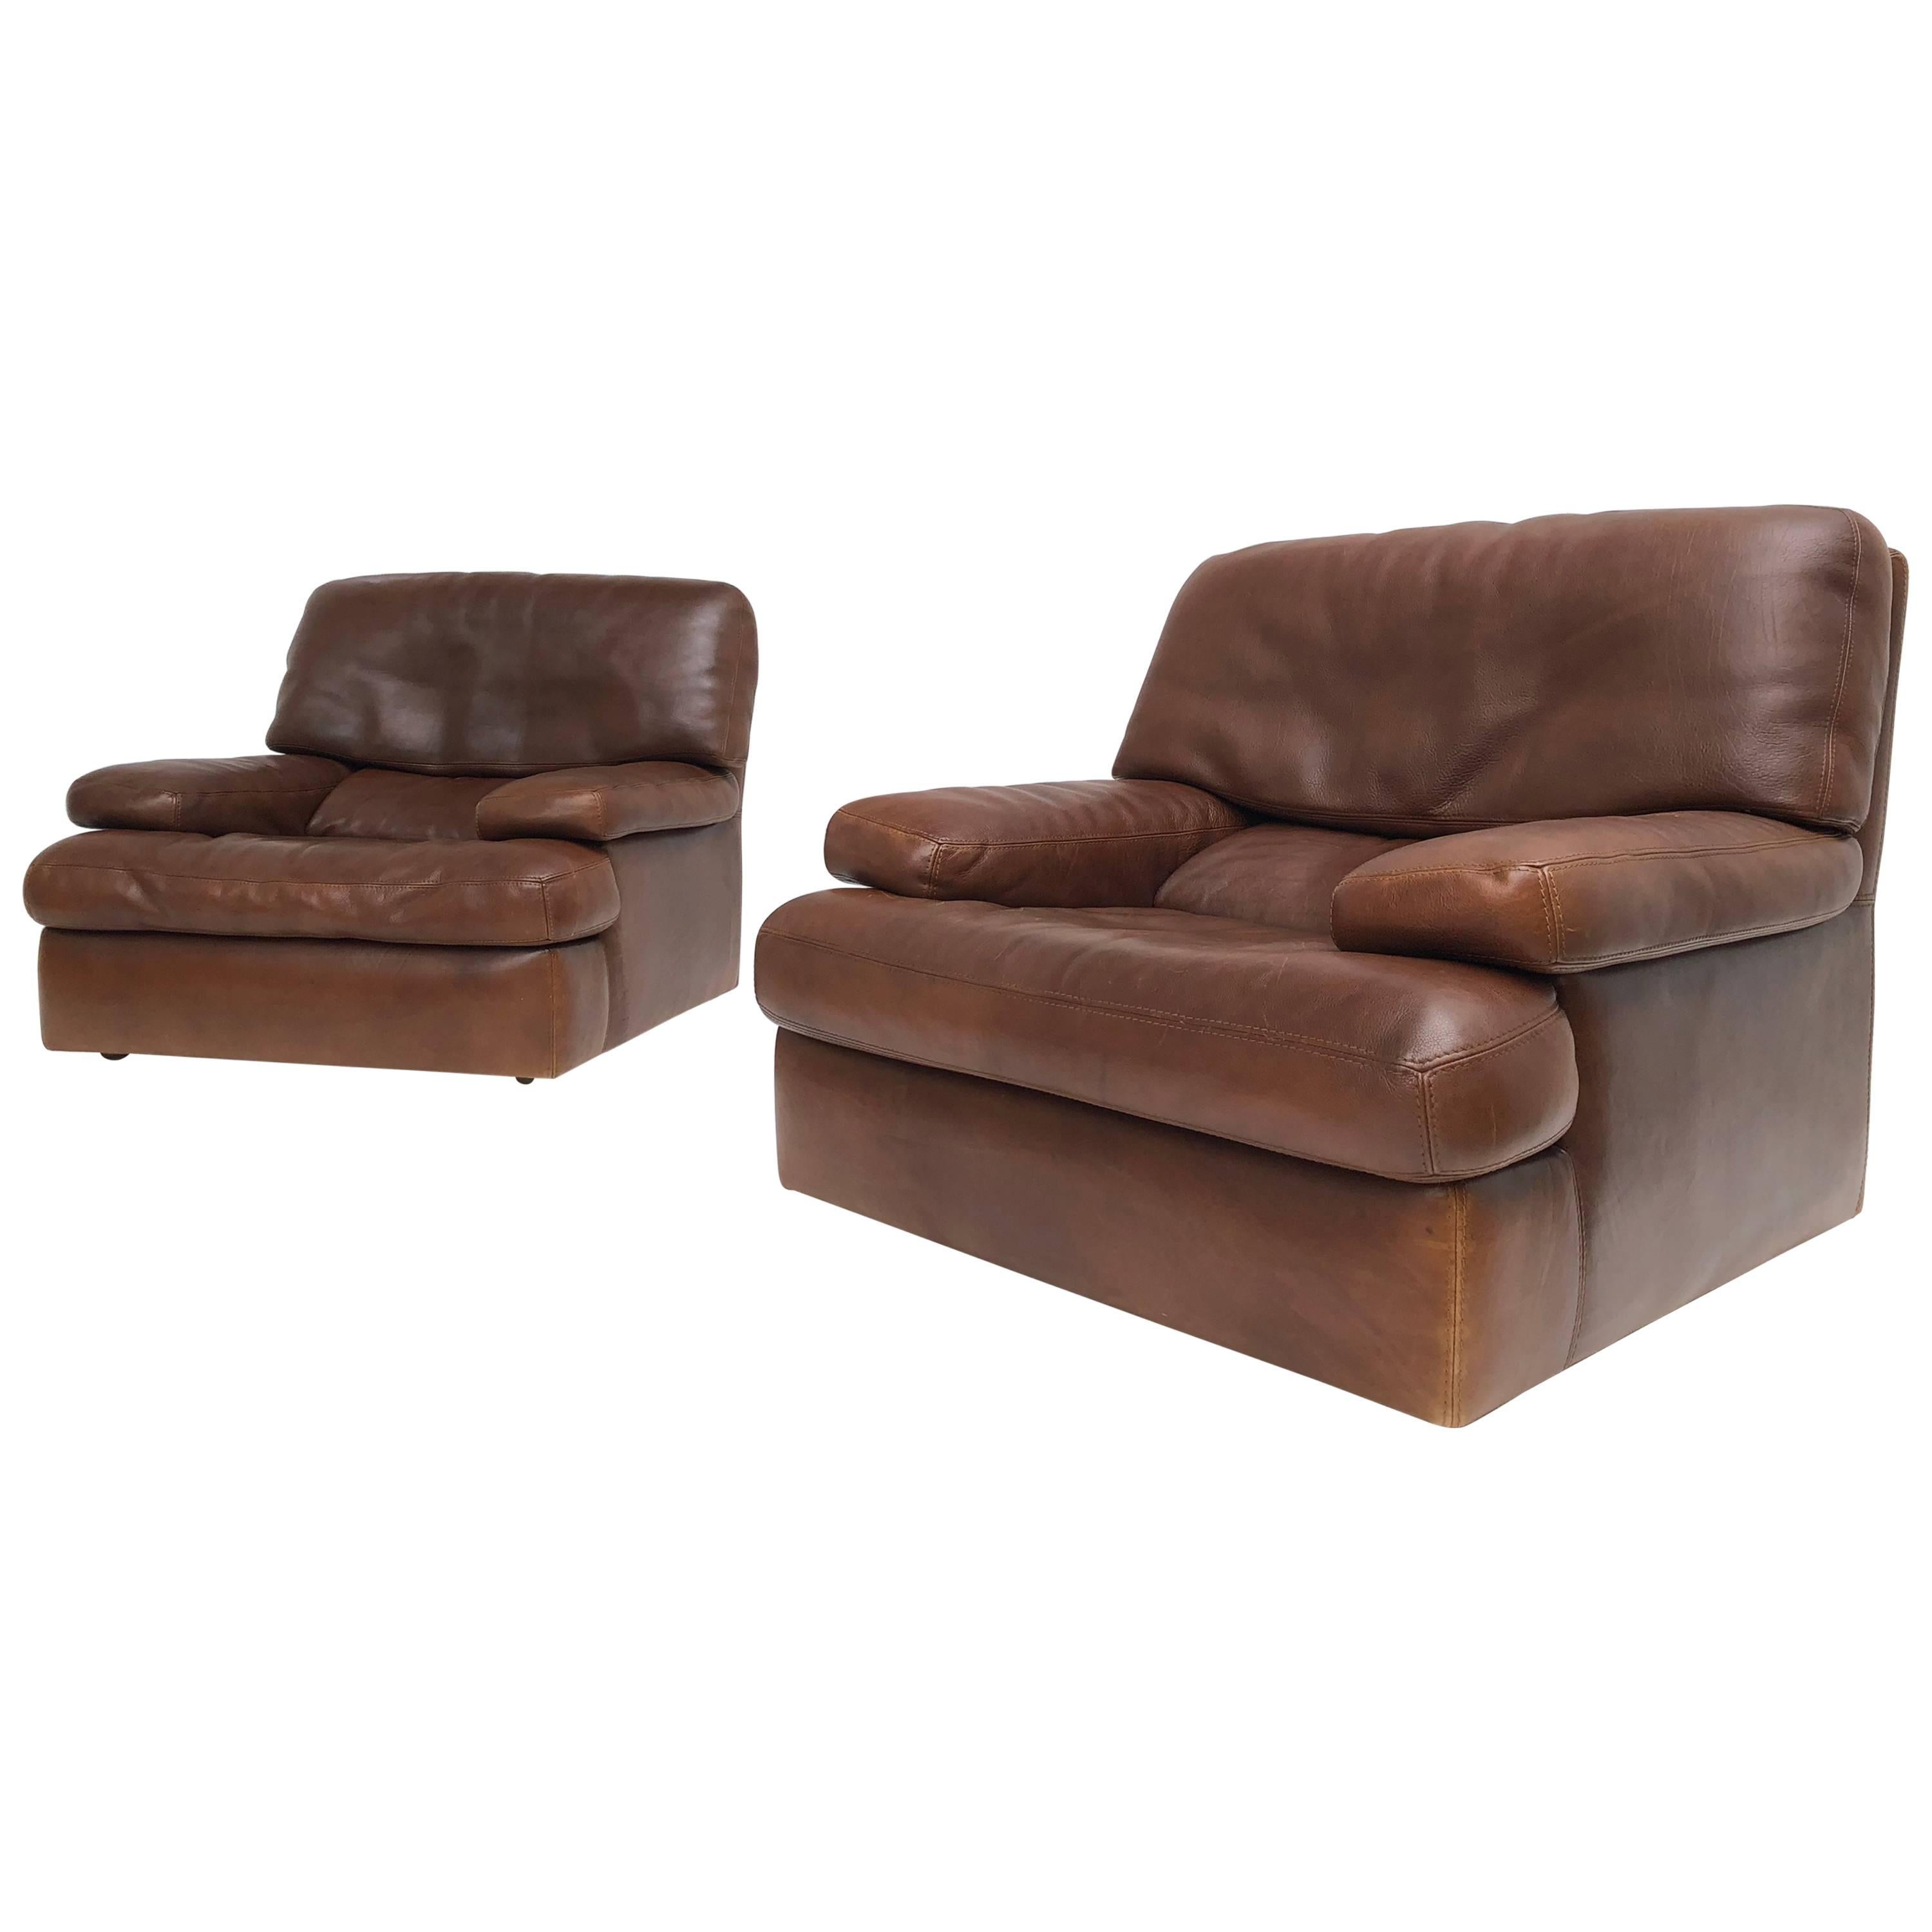 A pair of very comfortable chocolate brown vintage leather Roche Bobois lounge chairs

This is the kind of lounge chair you want to plunge into after a hard day of work

Superb quality thick leather with a beautiful vintage patina 

French